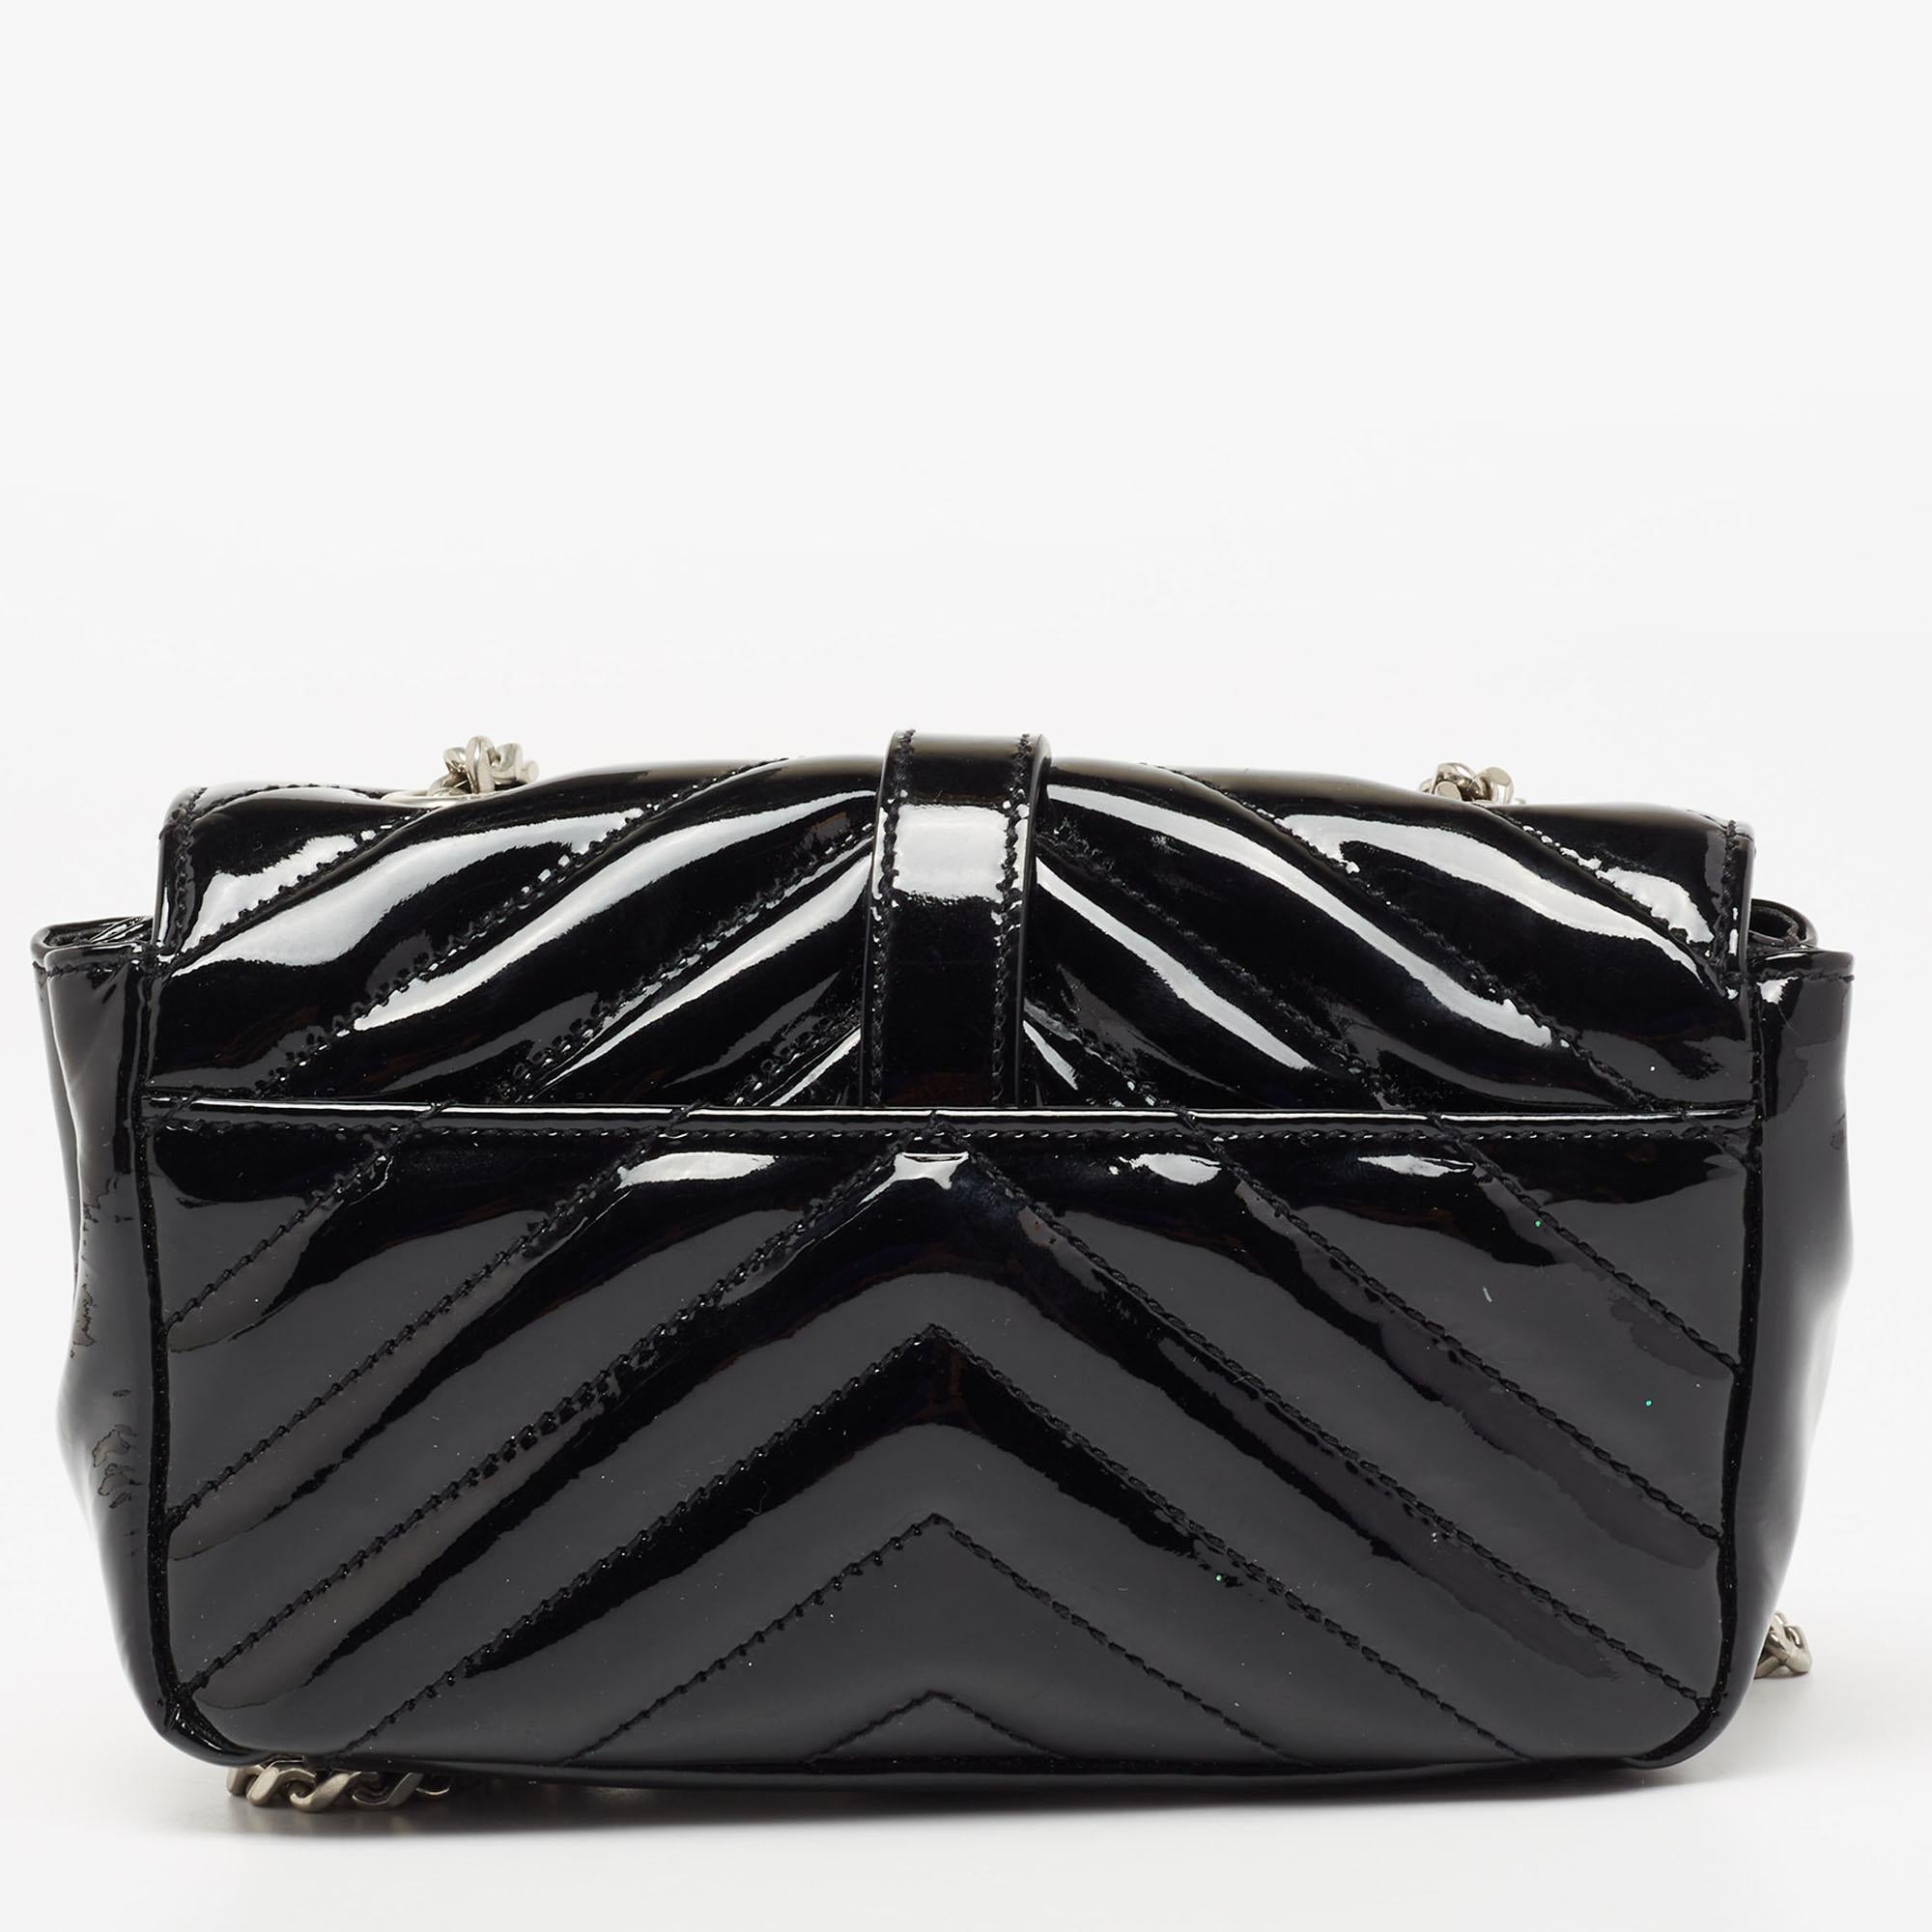 Elegance meets luxury in this chain bag from the House of Saint Laurent. It is created using black matelassé leather, with a silver-toned YSL Monogram attached to the front. It features a roomy interior and a 57 cm chain strap. This gorgeous bag